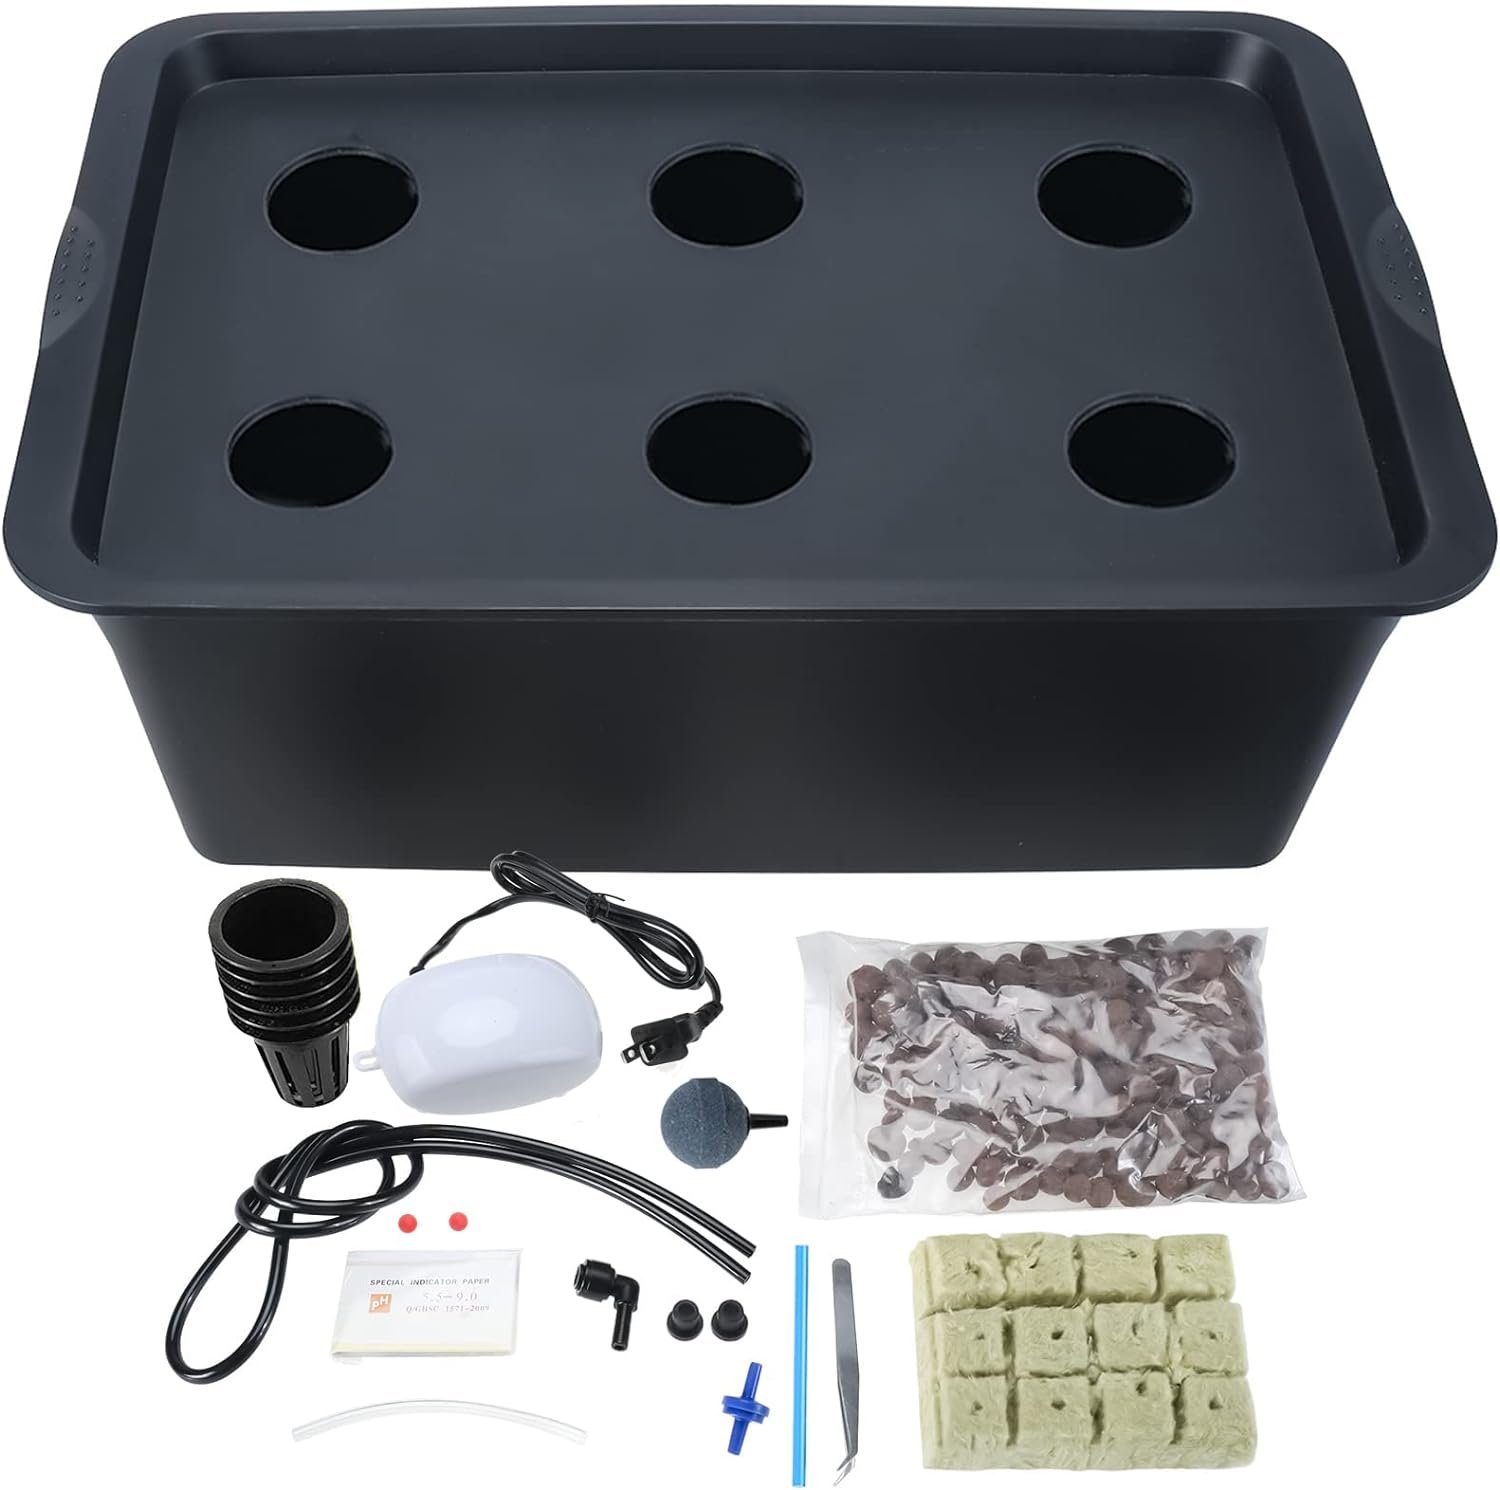 highfree hydroponic system growing kit review